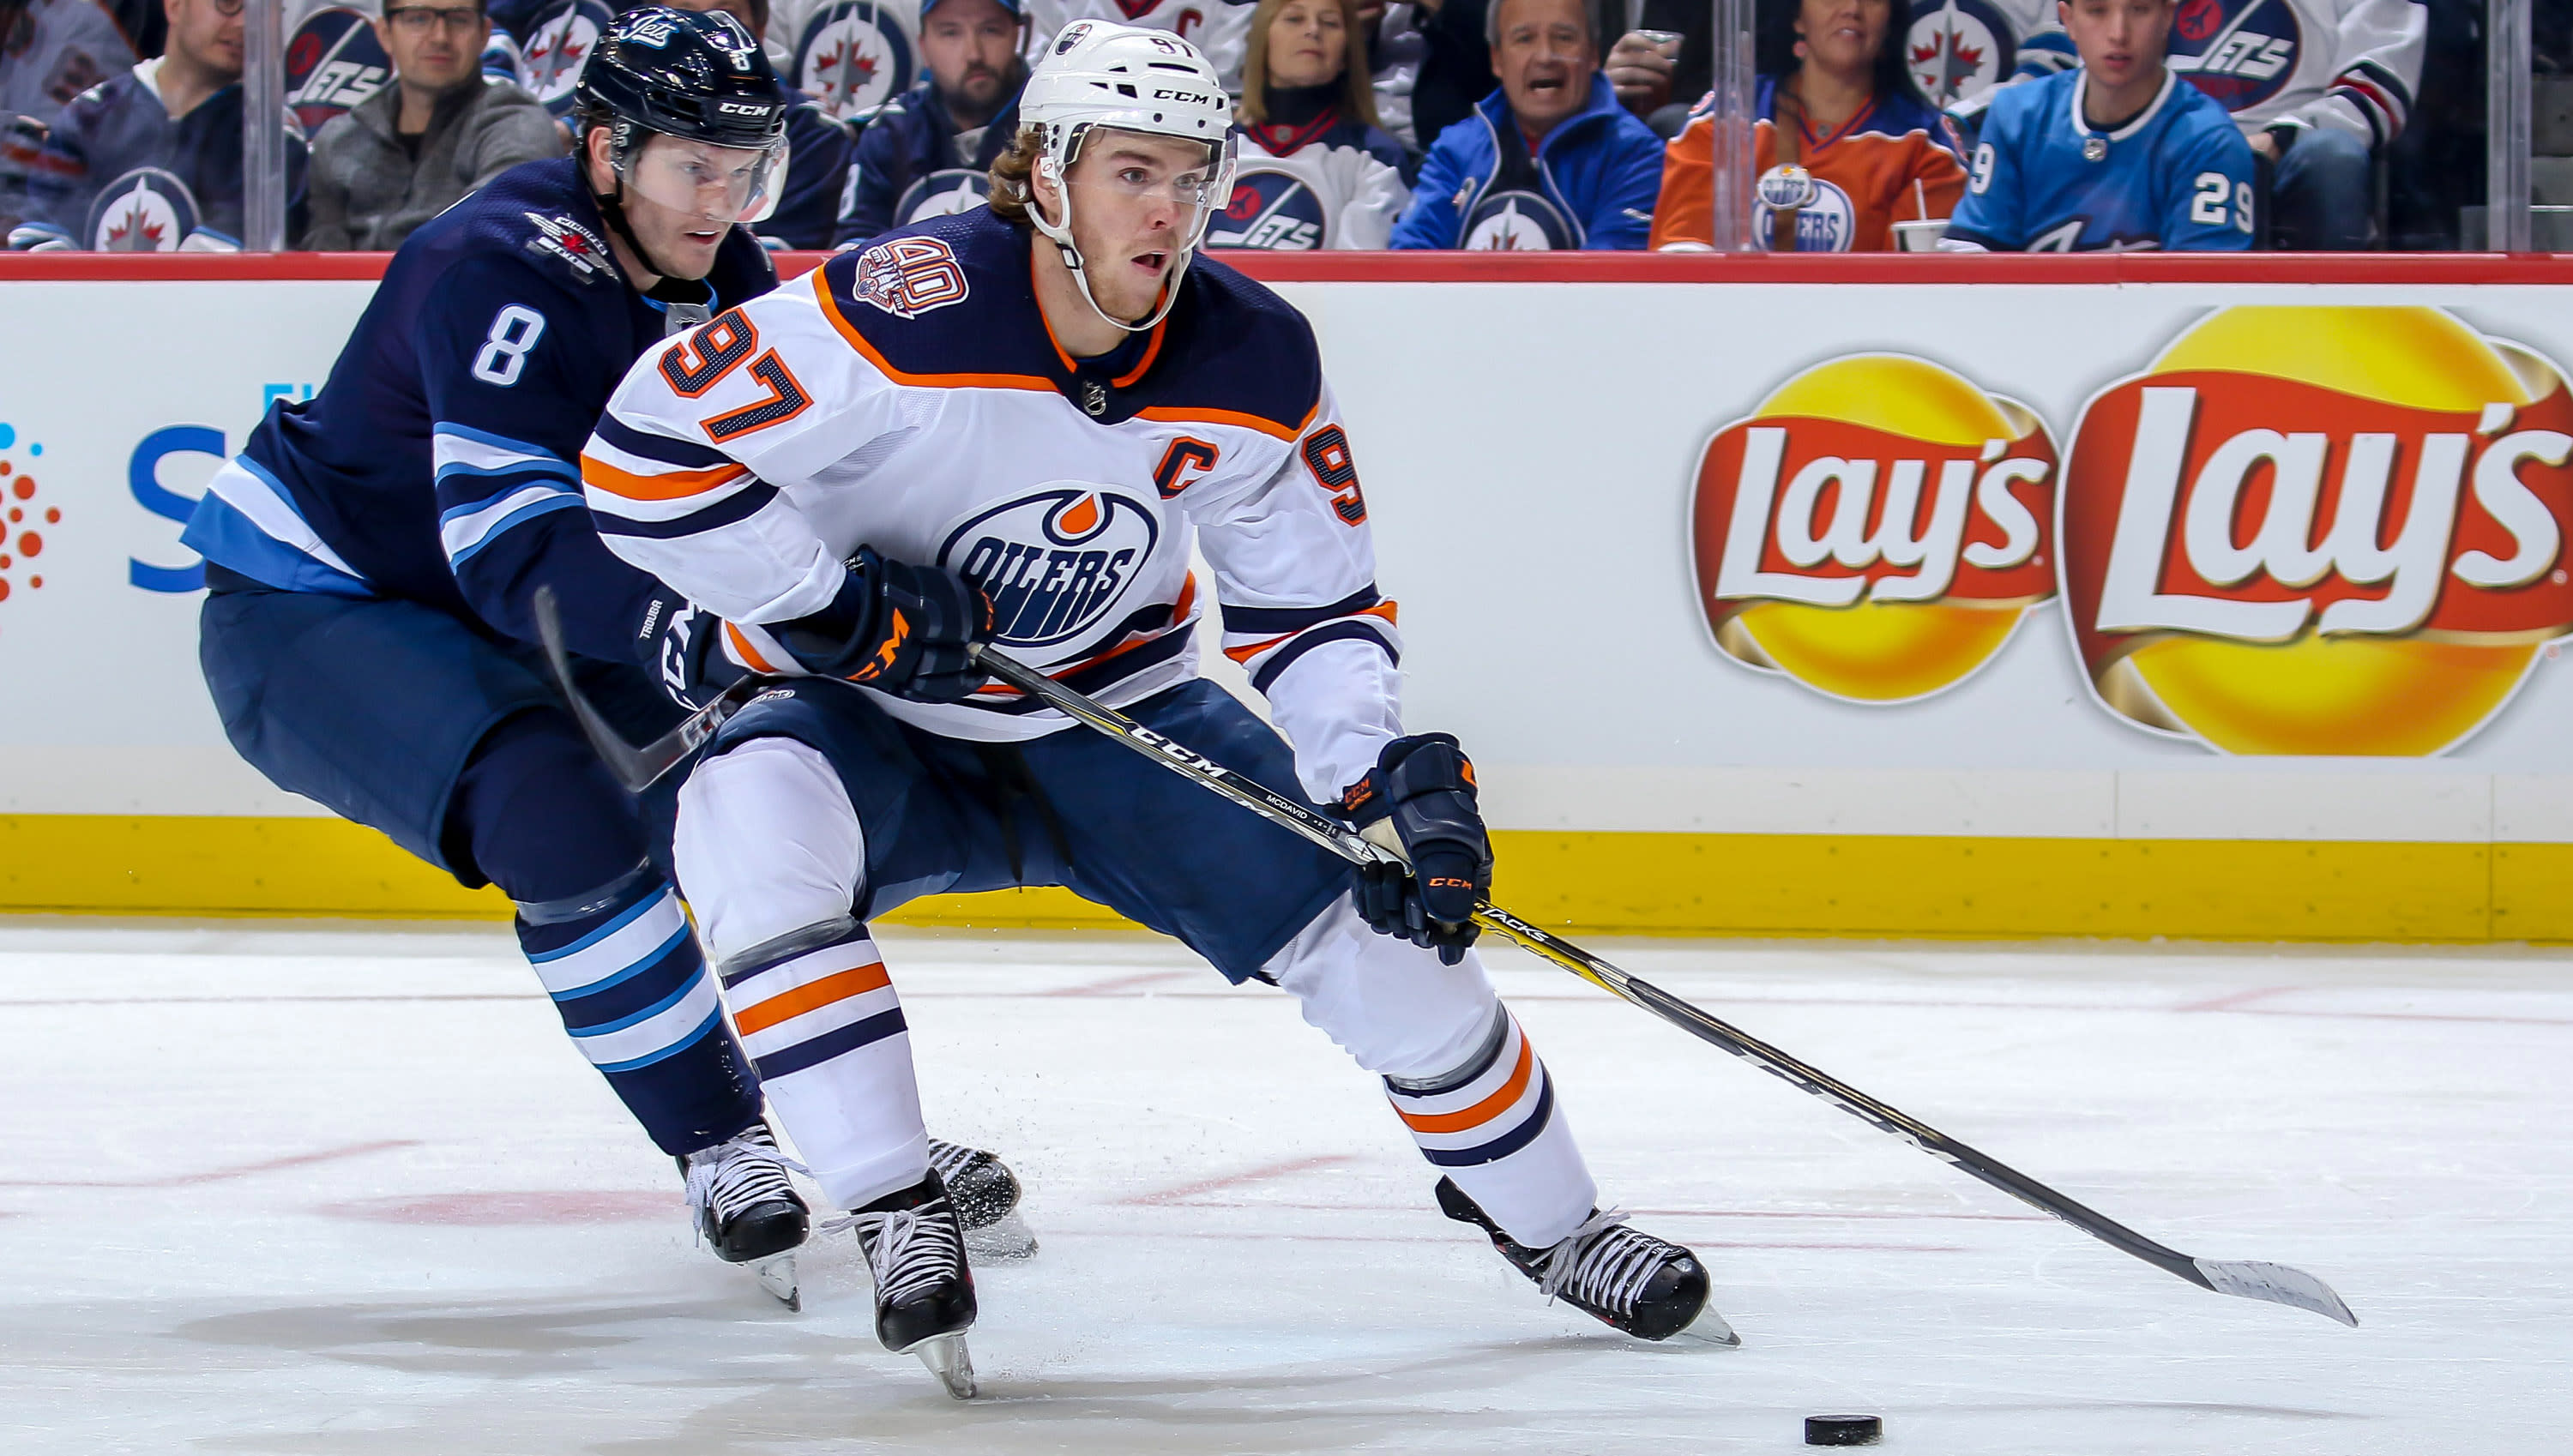 Connor McDavid proves to be a one-man team... again